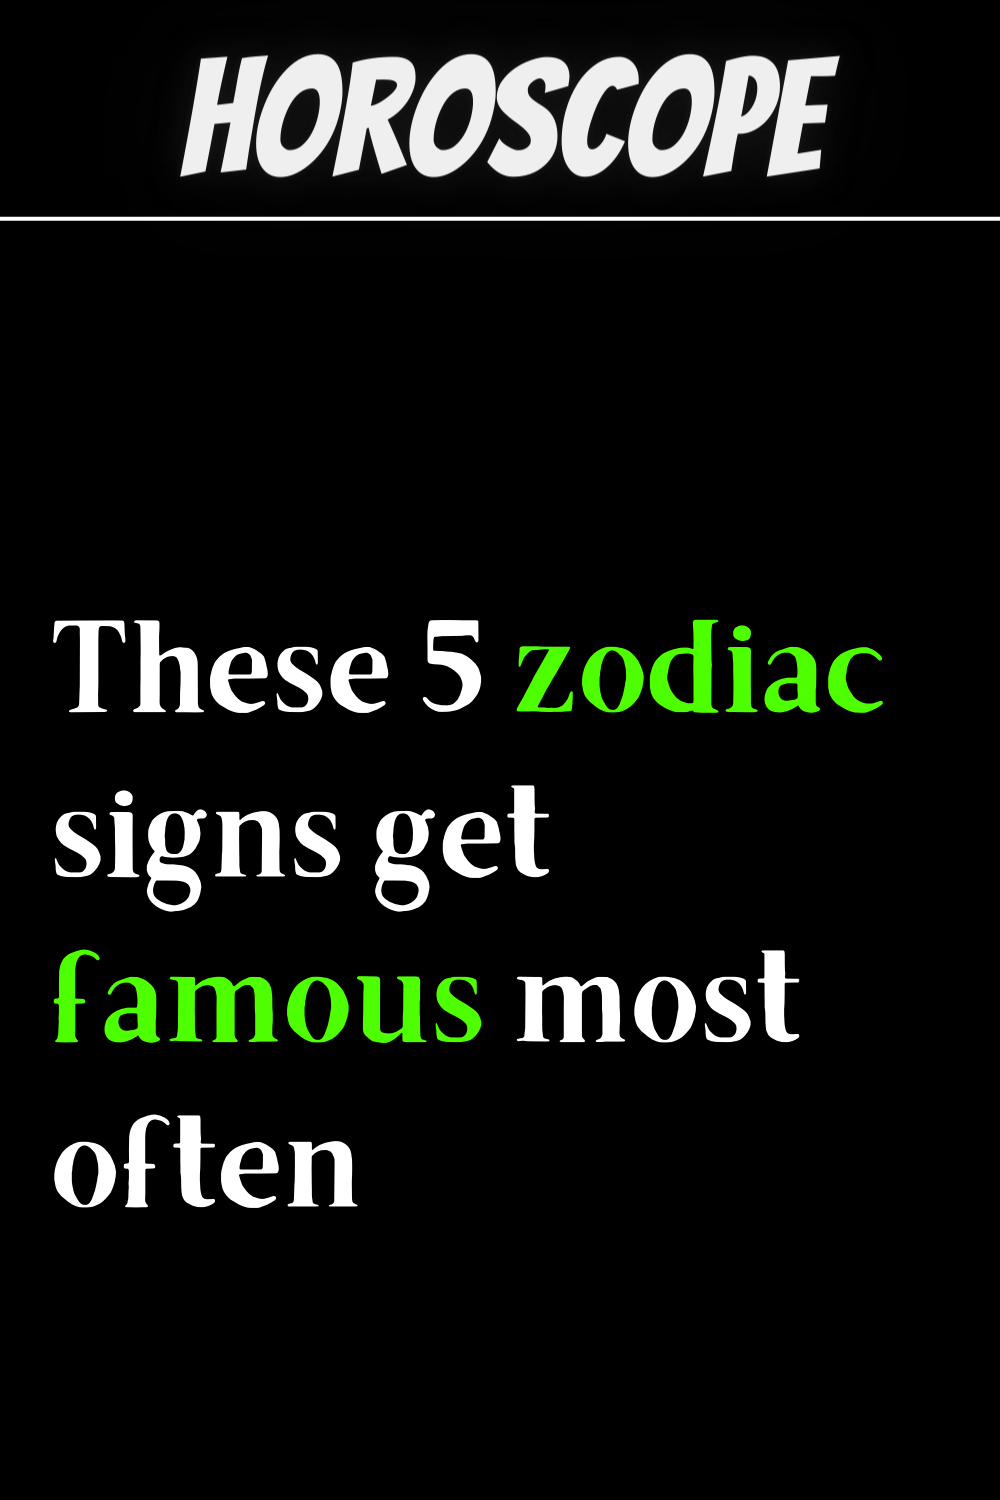 These 5 zodiac signs get famous most often